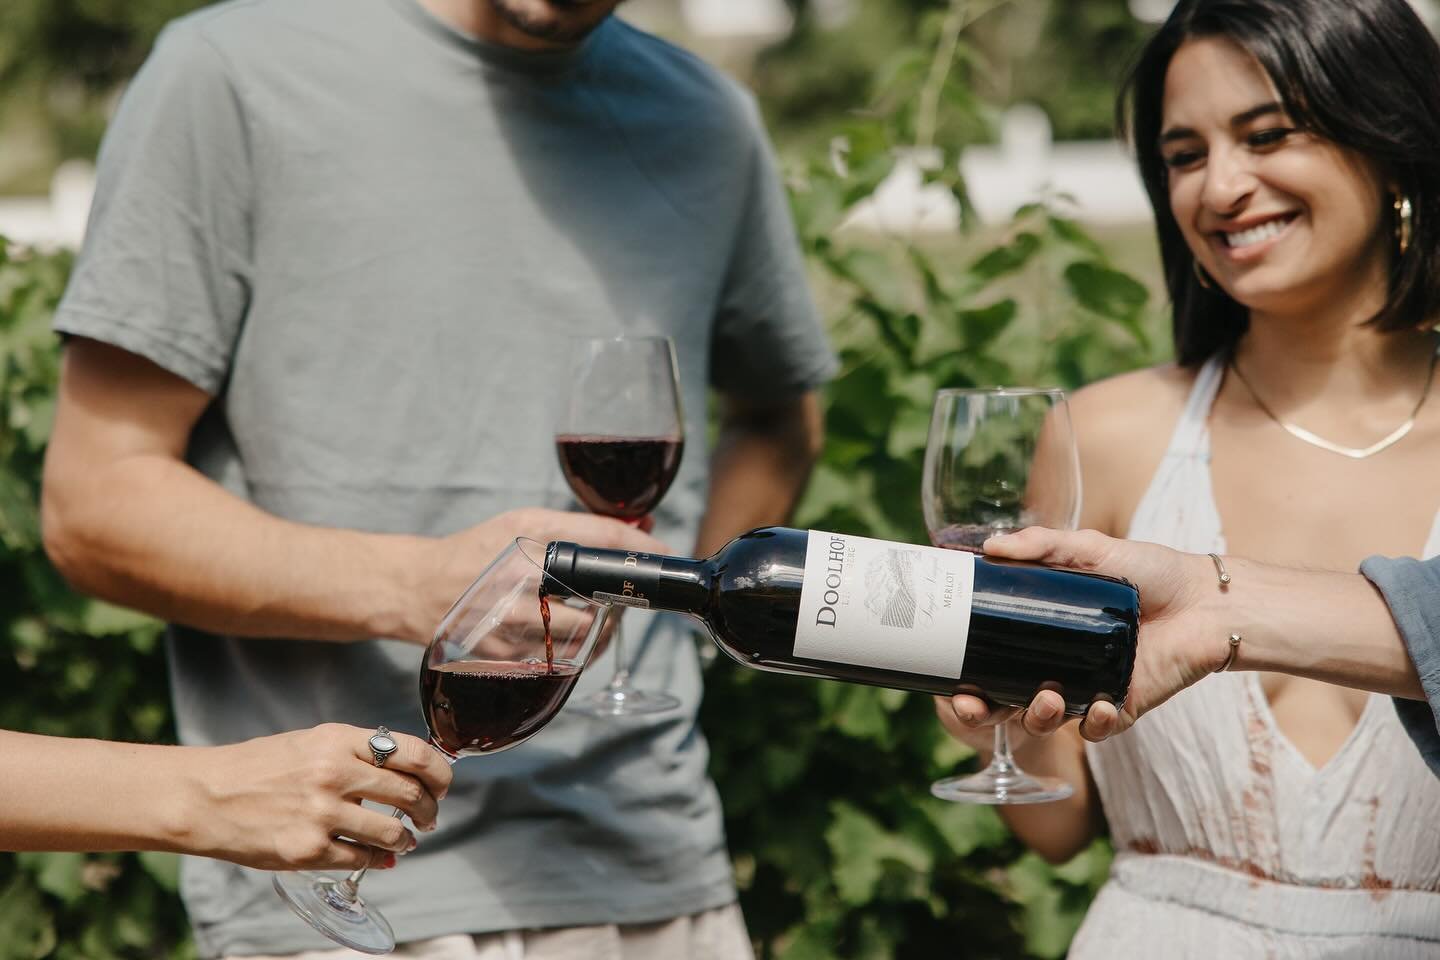 Doolhof Wine Estate is definitely the place to be, it&rsquo;s the spot to relax and enjoy. 

Our estate serves as the ideal place to getaway with friends, family or just alone time. The estate offers a variety of options such as wine tasting &bull; p